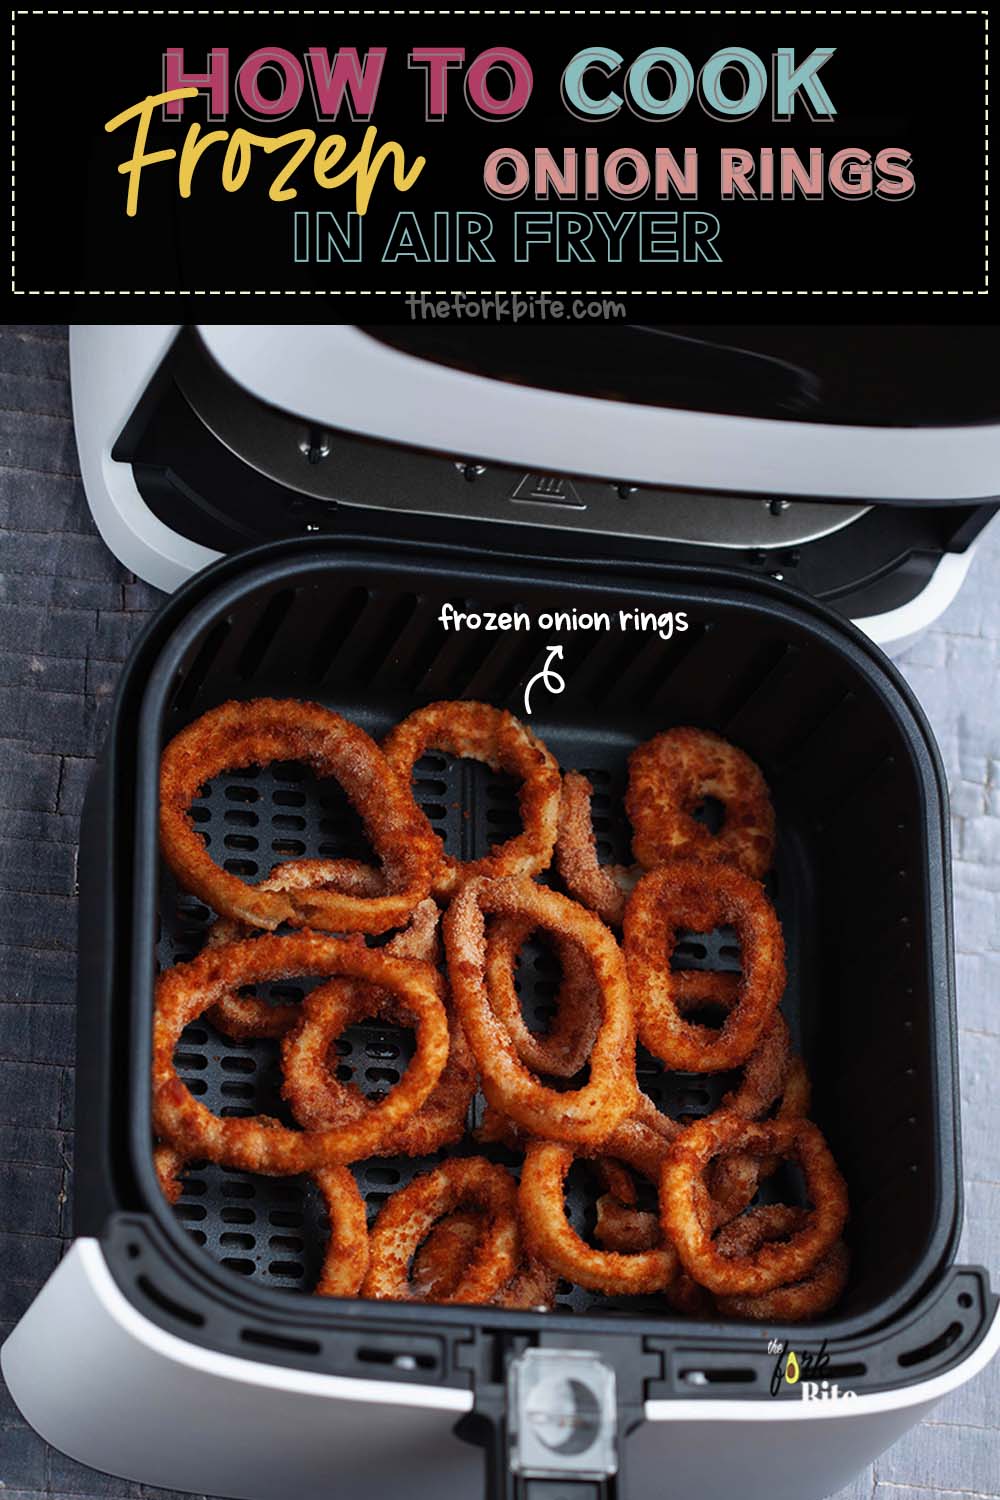 When it comes to the question of which are the best type of frozen onion rings to buy, basically, there are two choices. The first is breaded rings. In my book, these are alright.